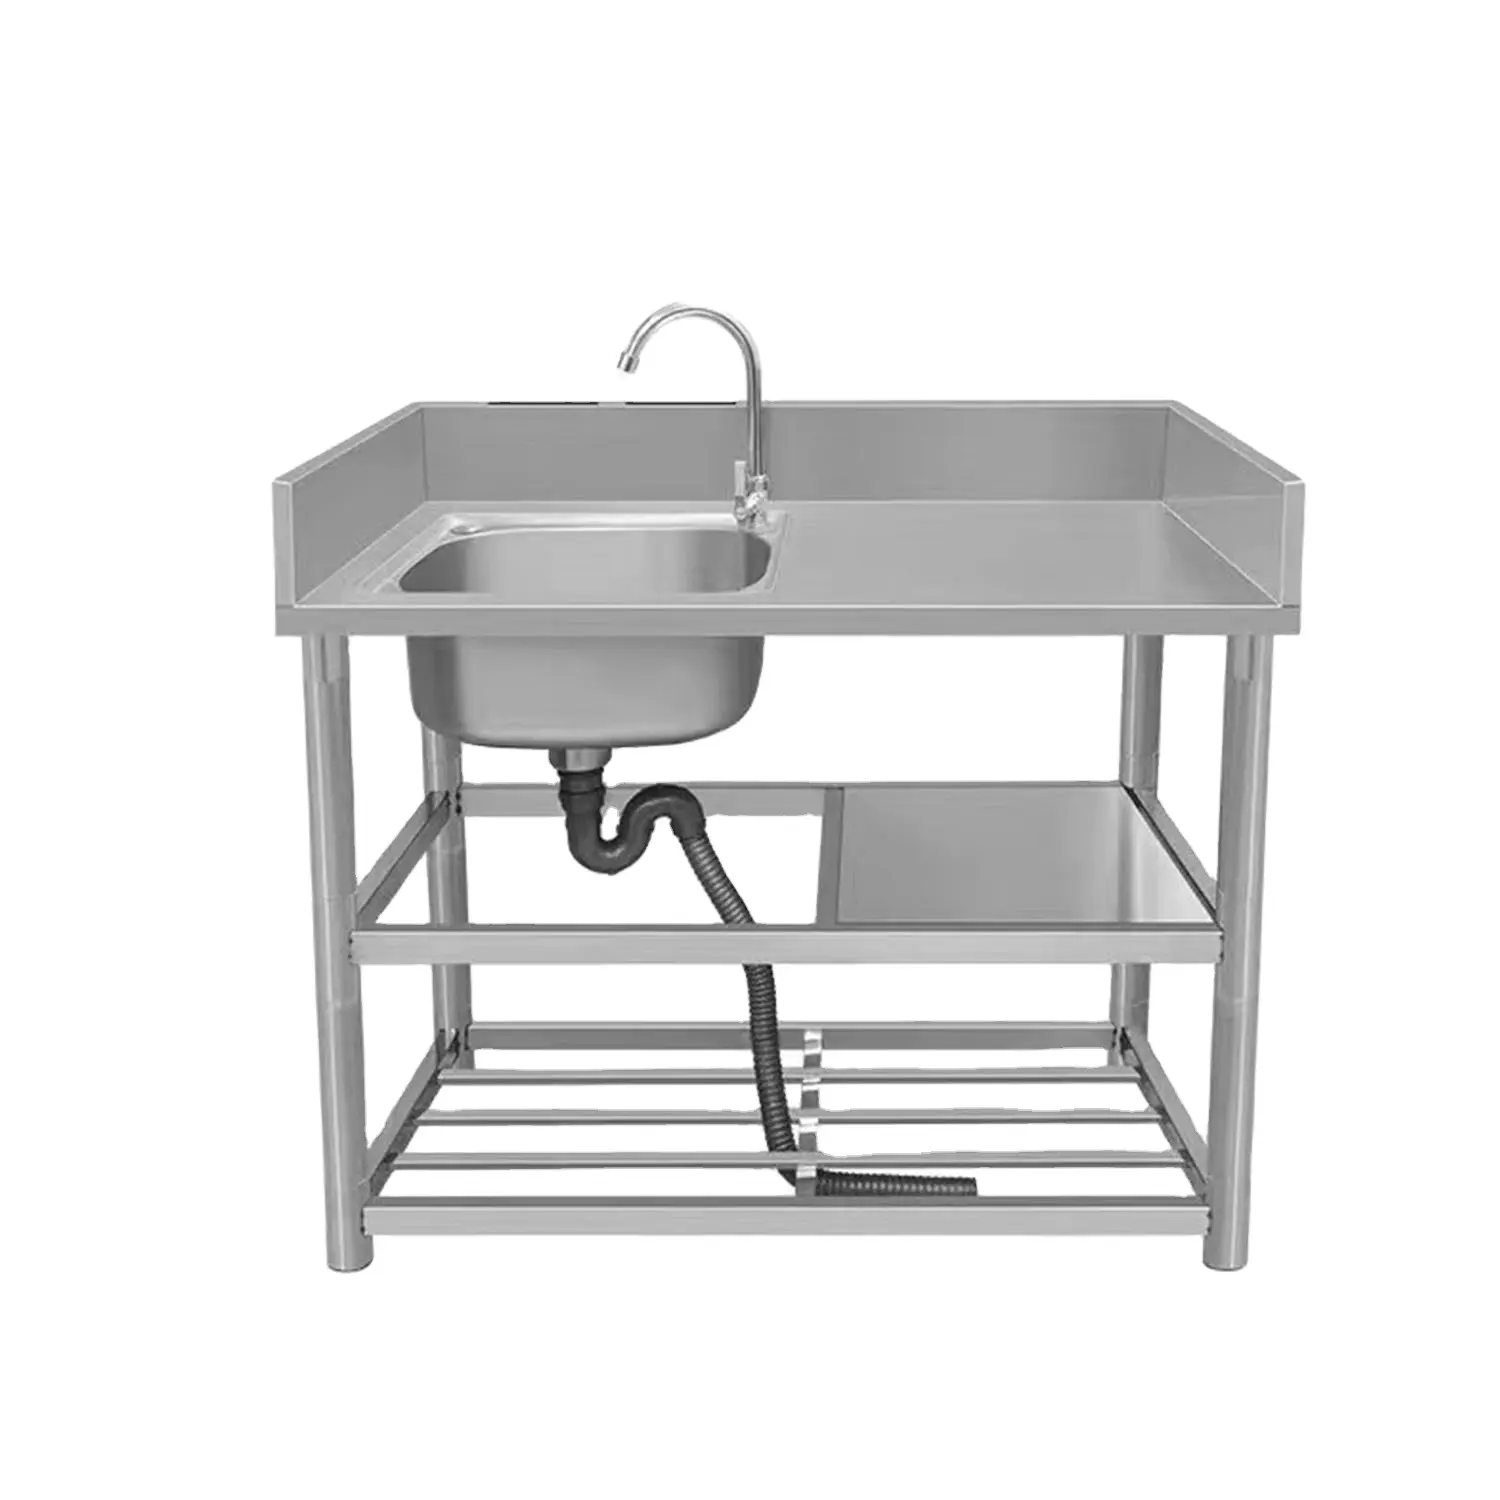 High Quality In Short Supply Single Bowl Sink With Drainer Kitchen Sink Stainless Steel